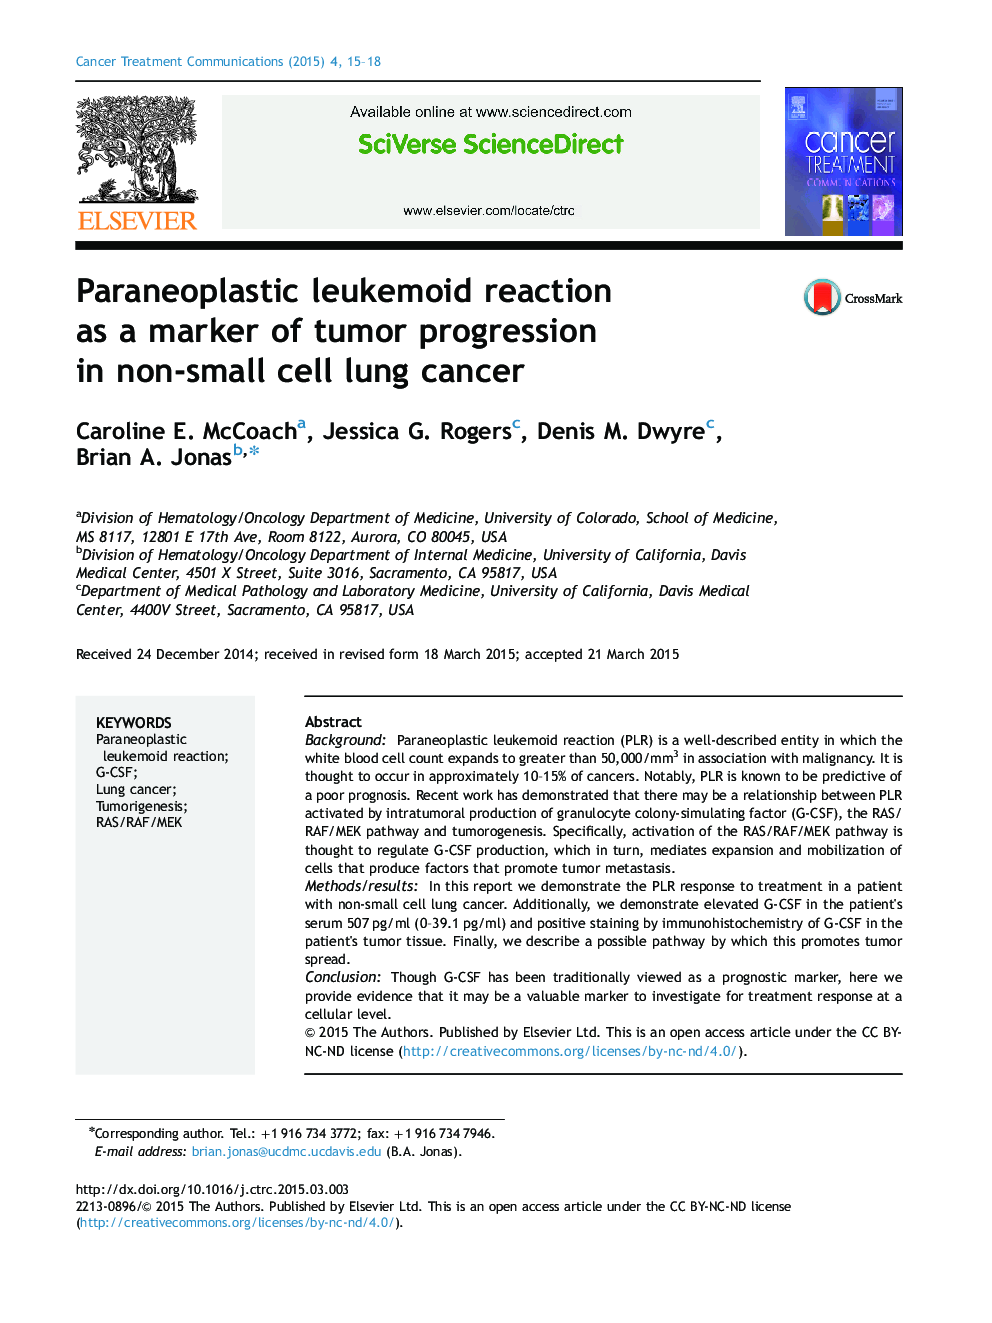 Paraneoplastic leukemoid reaction as a marker of tumor progression in non-small cell lung cancer